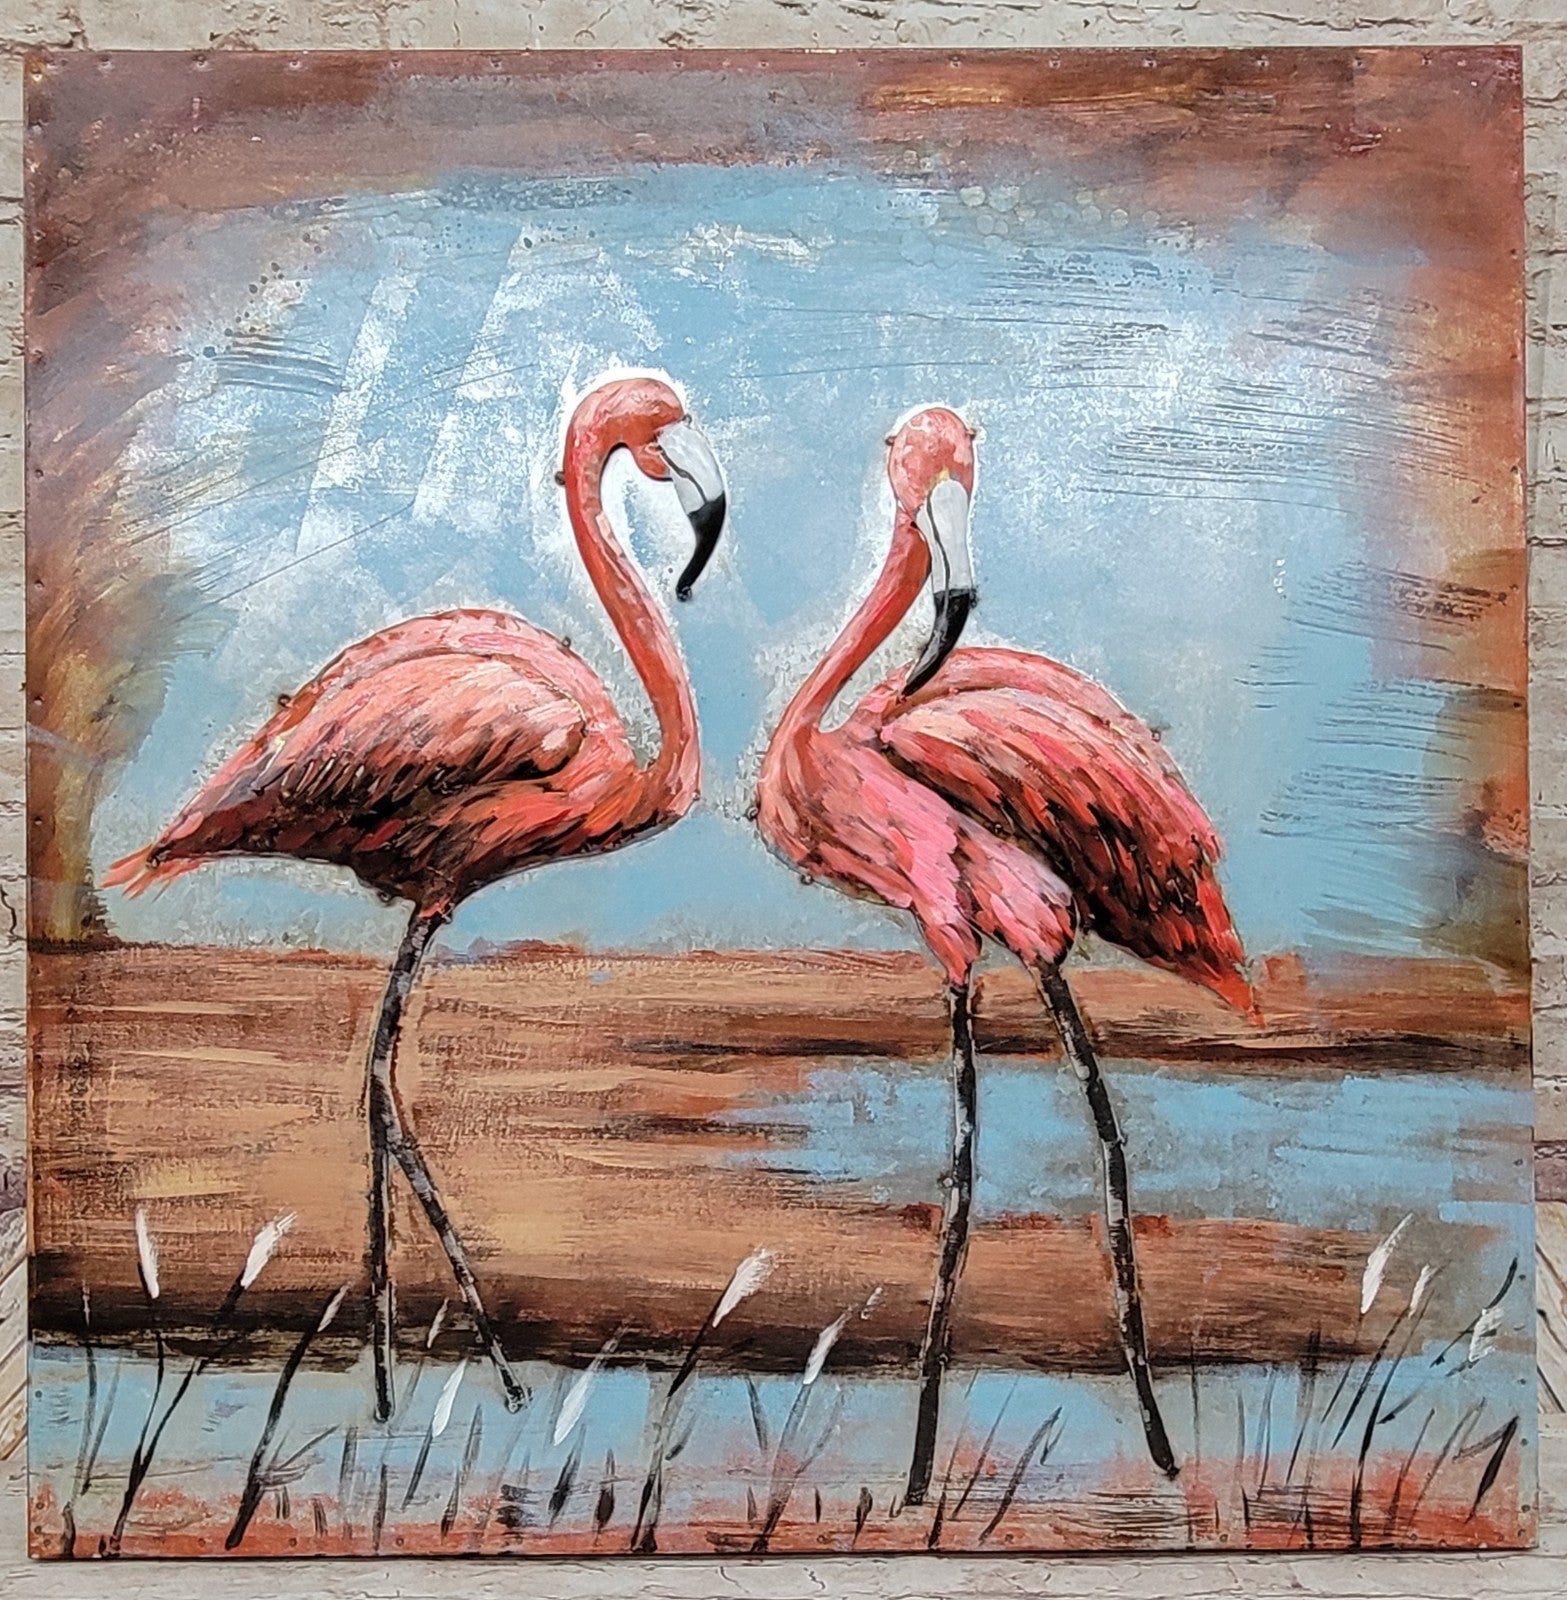 Handcrafted 3D Flamingo Metal Wall Art 32 by 32 Inches Artwork Sculpture